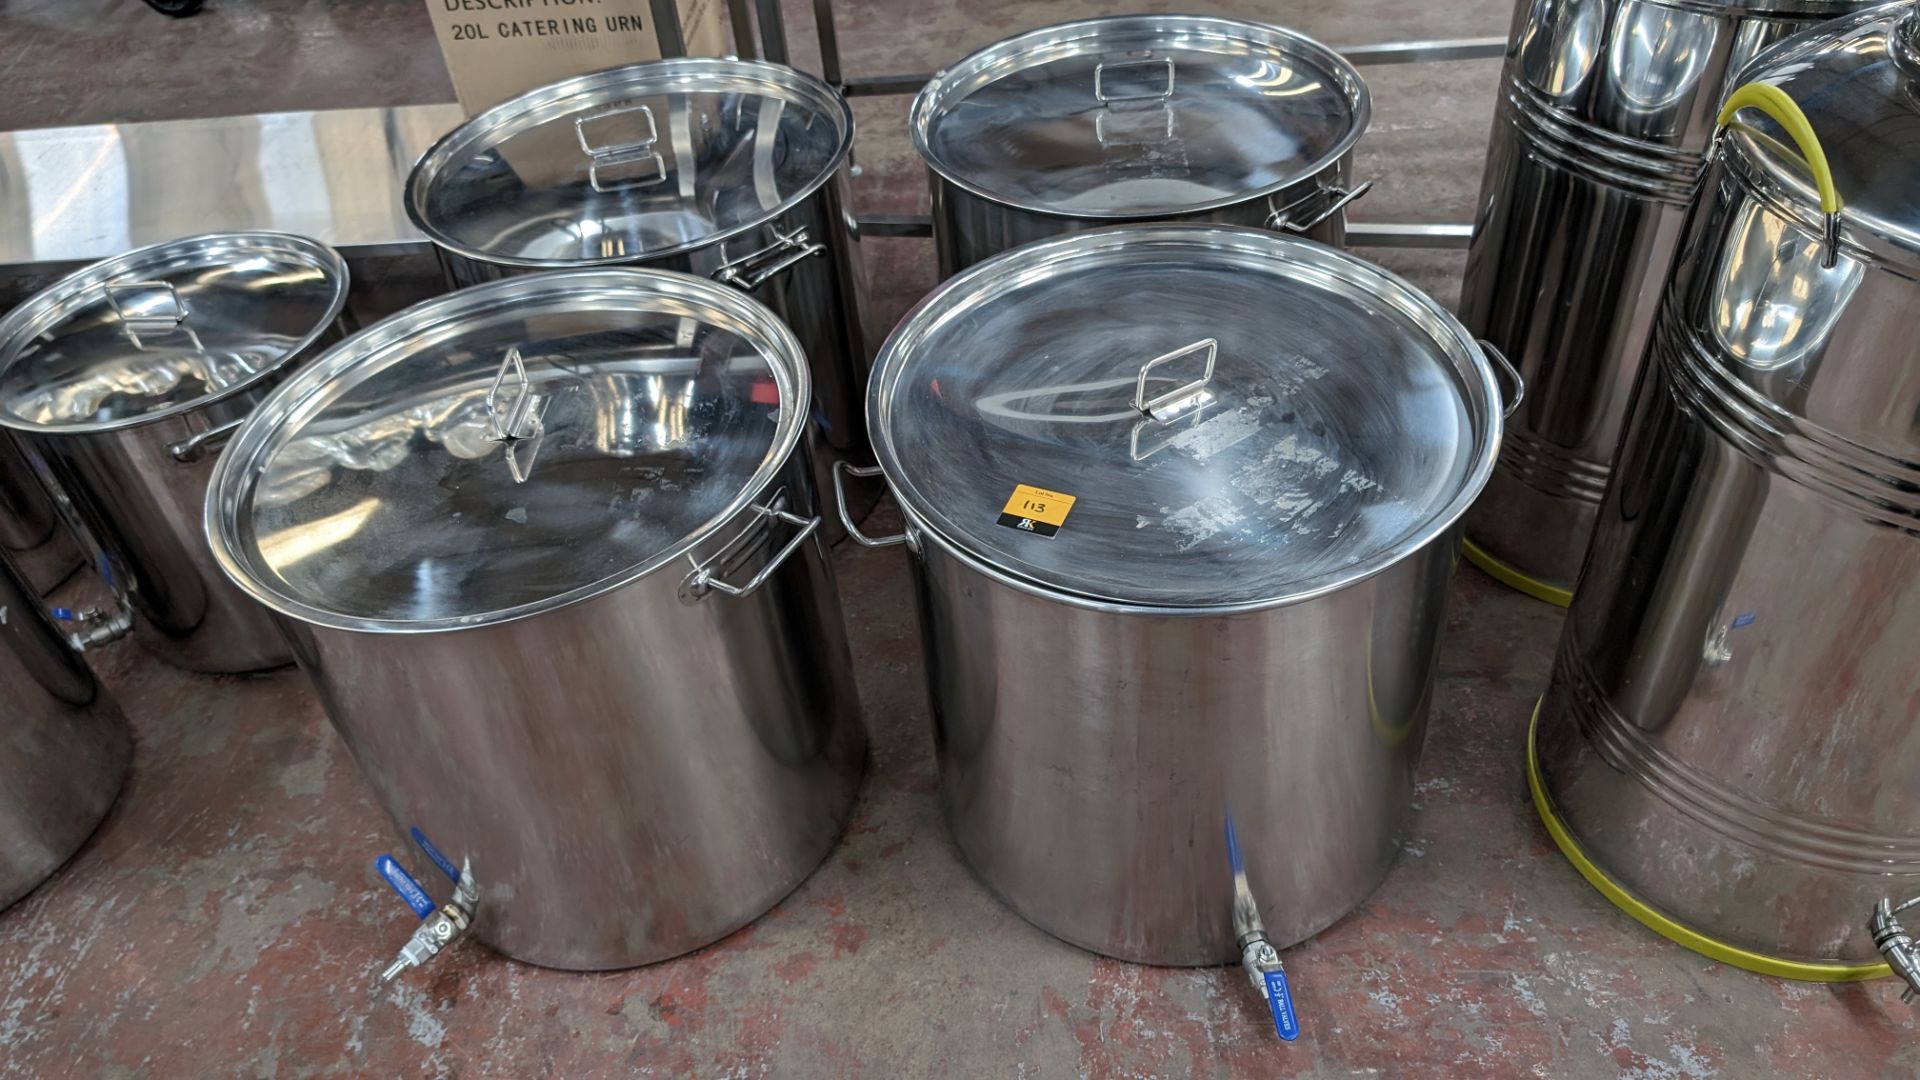 4 off large stainless steel brew kettles. Each with their own lid. Capacity: 100L